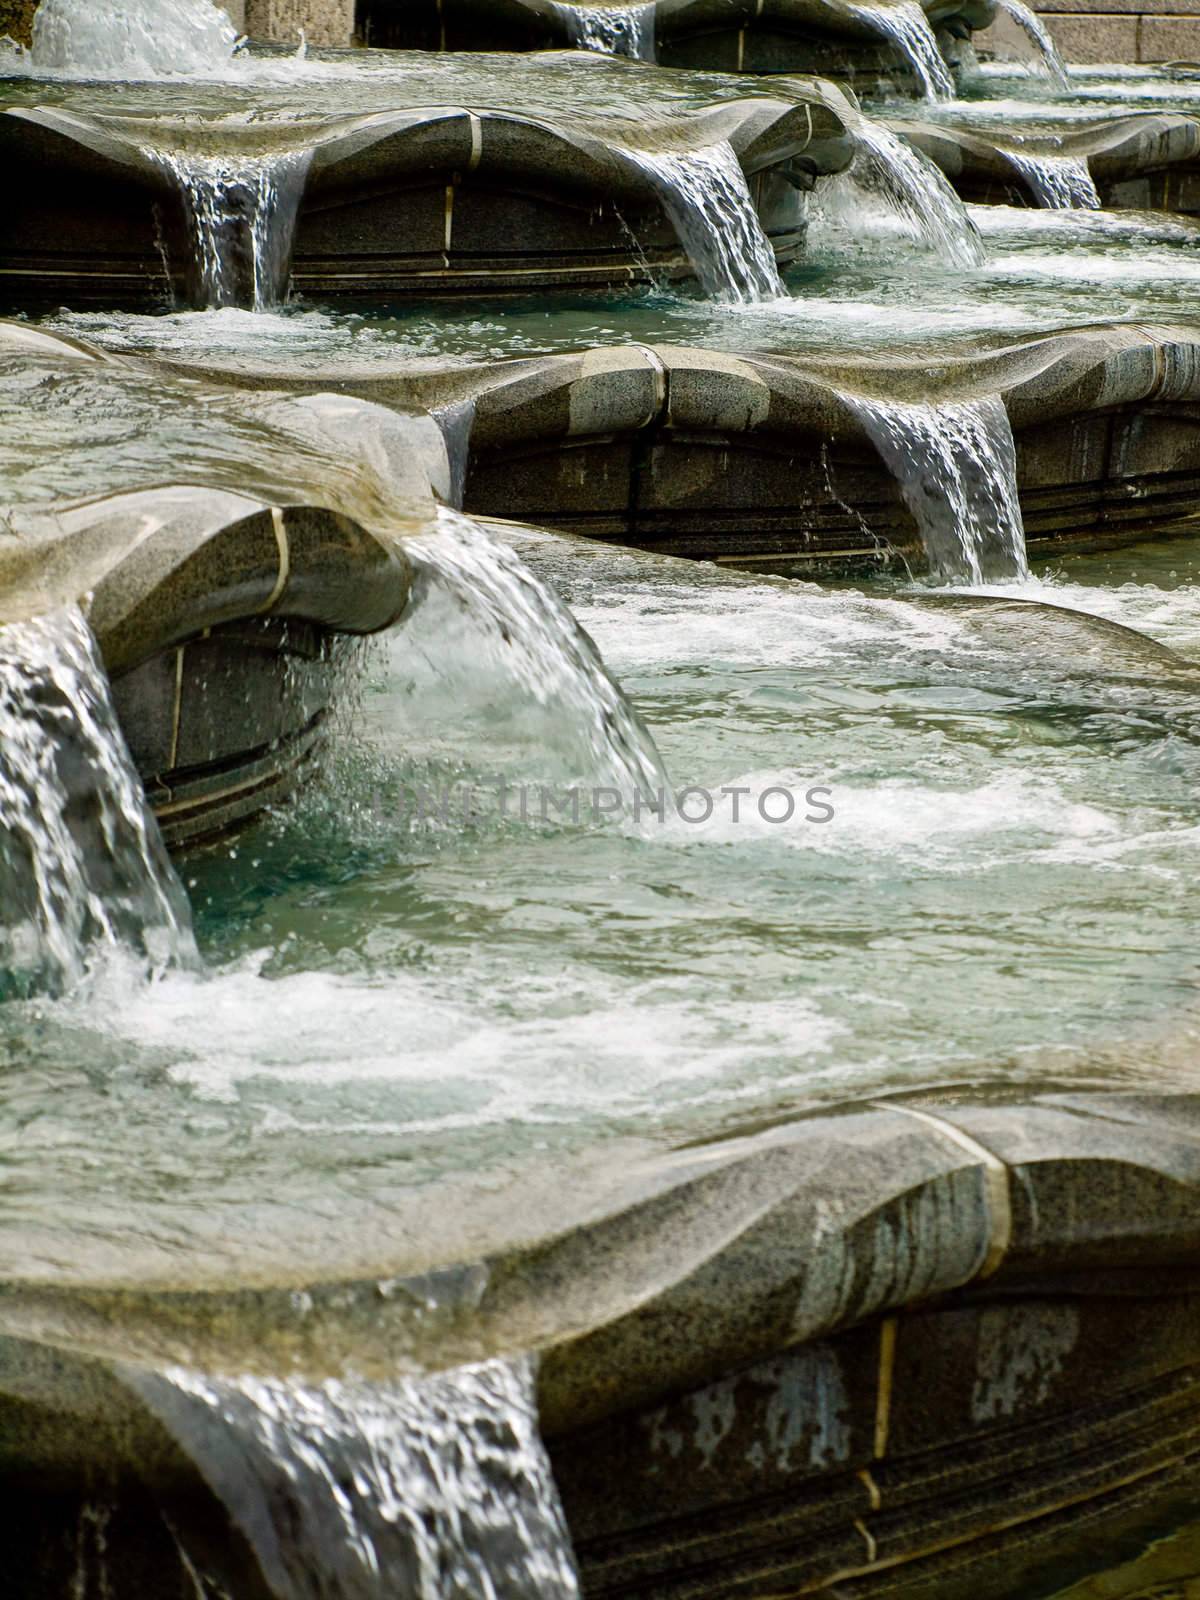 Water in a Fountain Flowing with a Slow Shutter